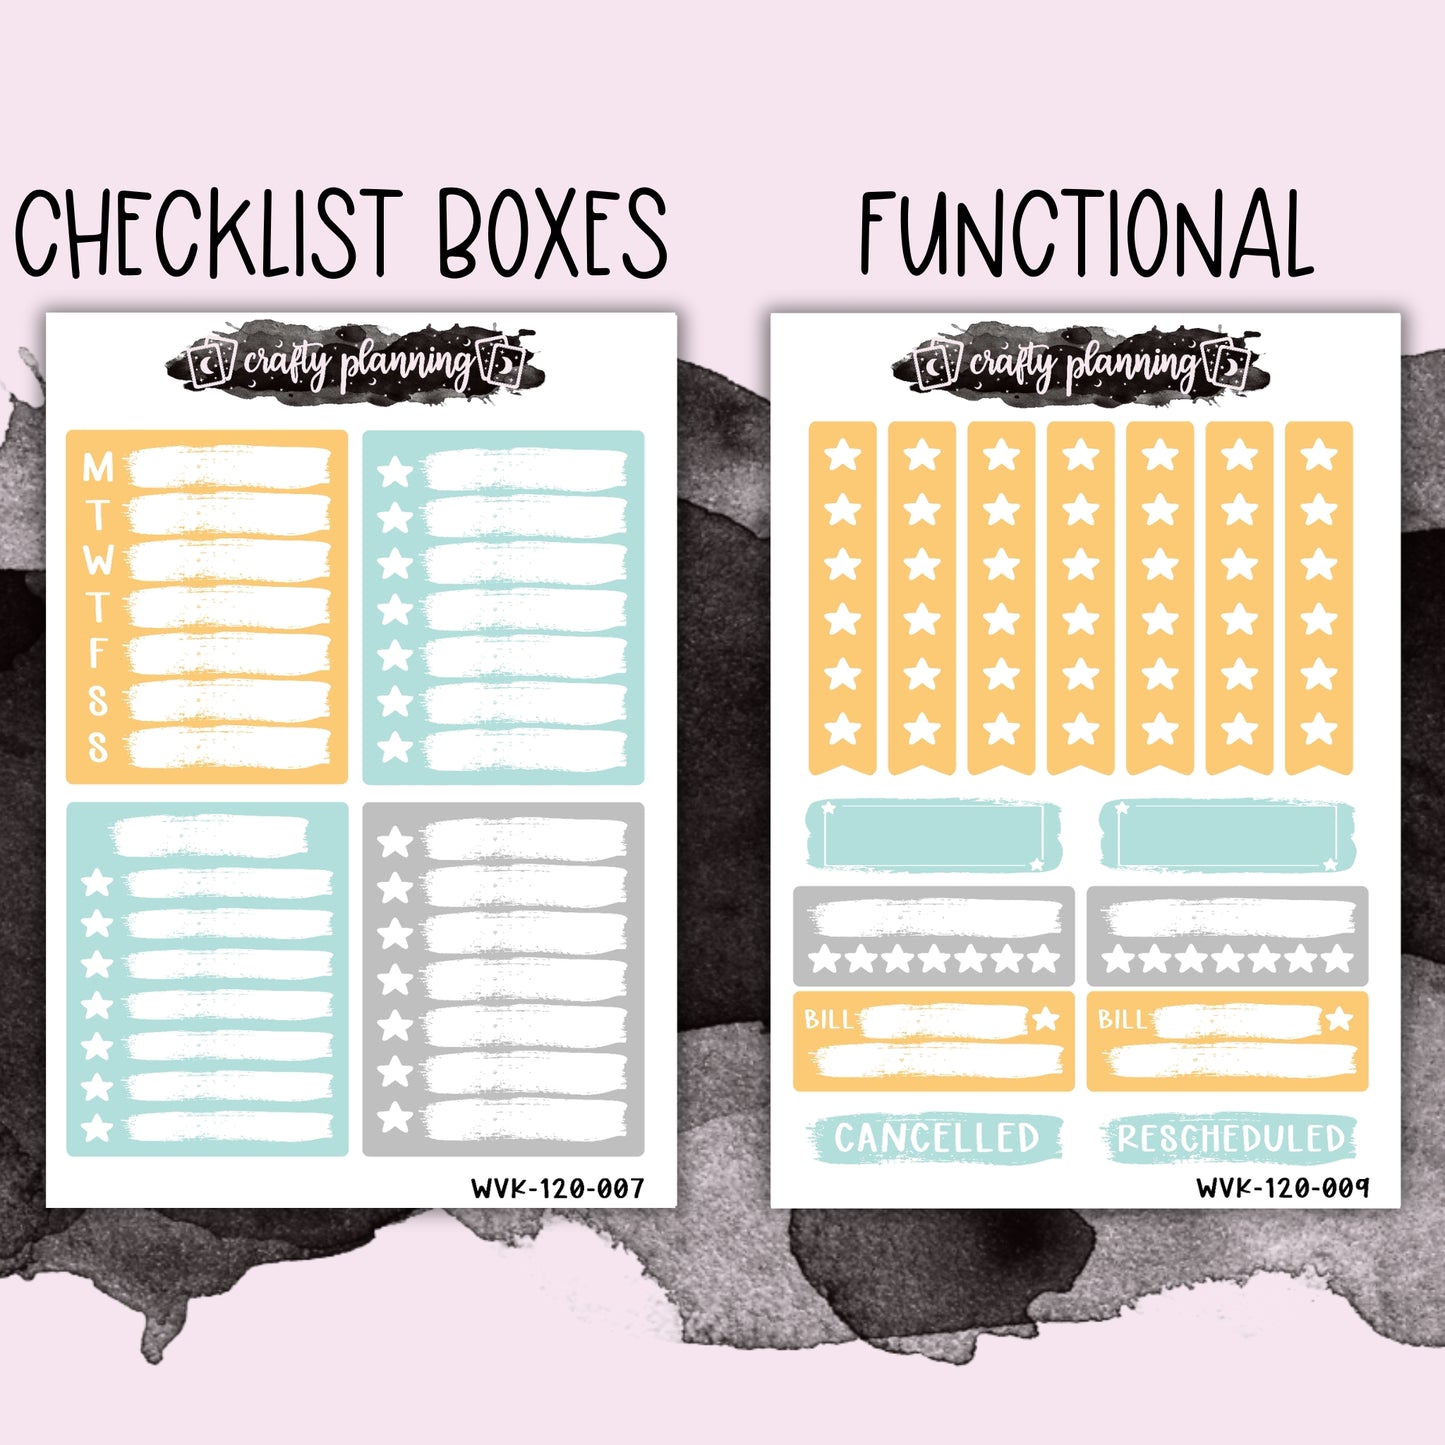 Bee Yourself - Vertical Planner - Mix & Match Kits